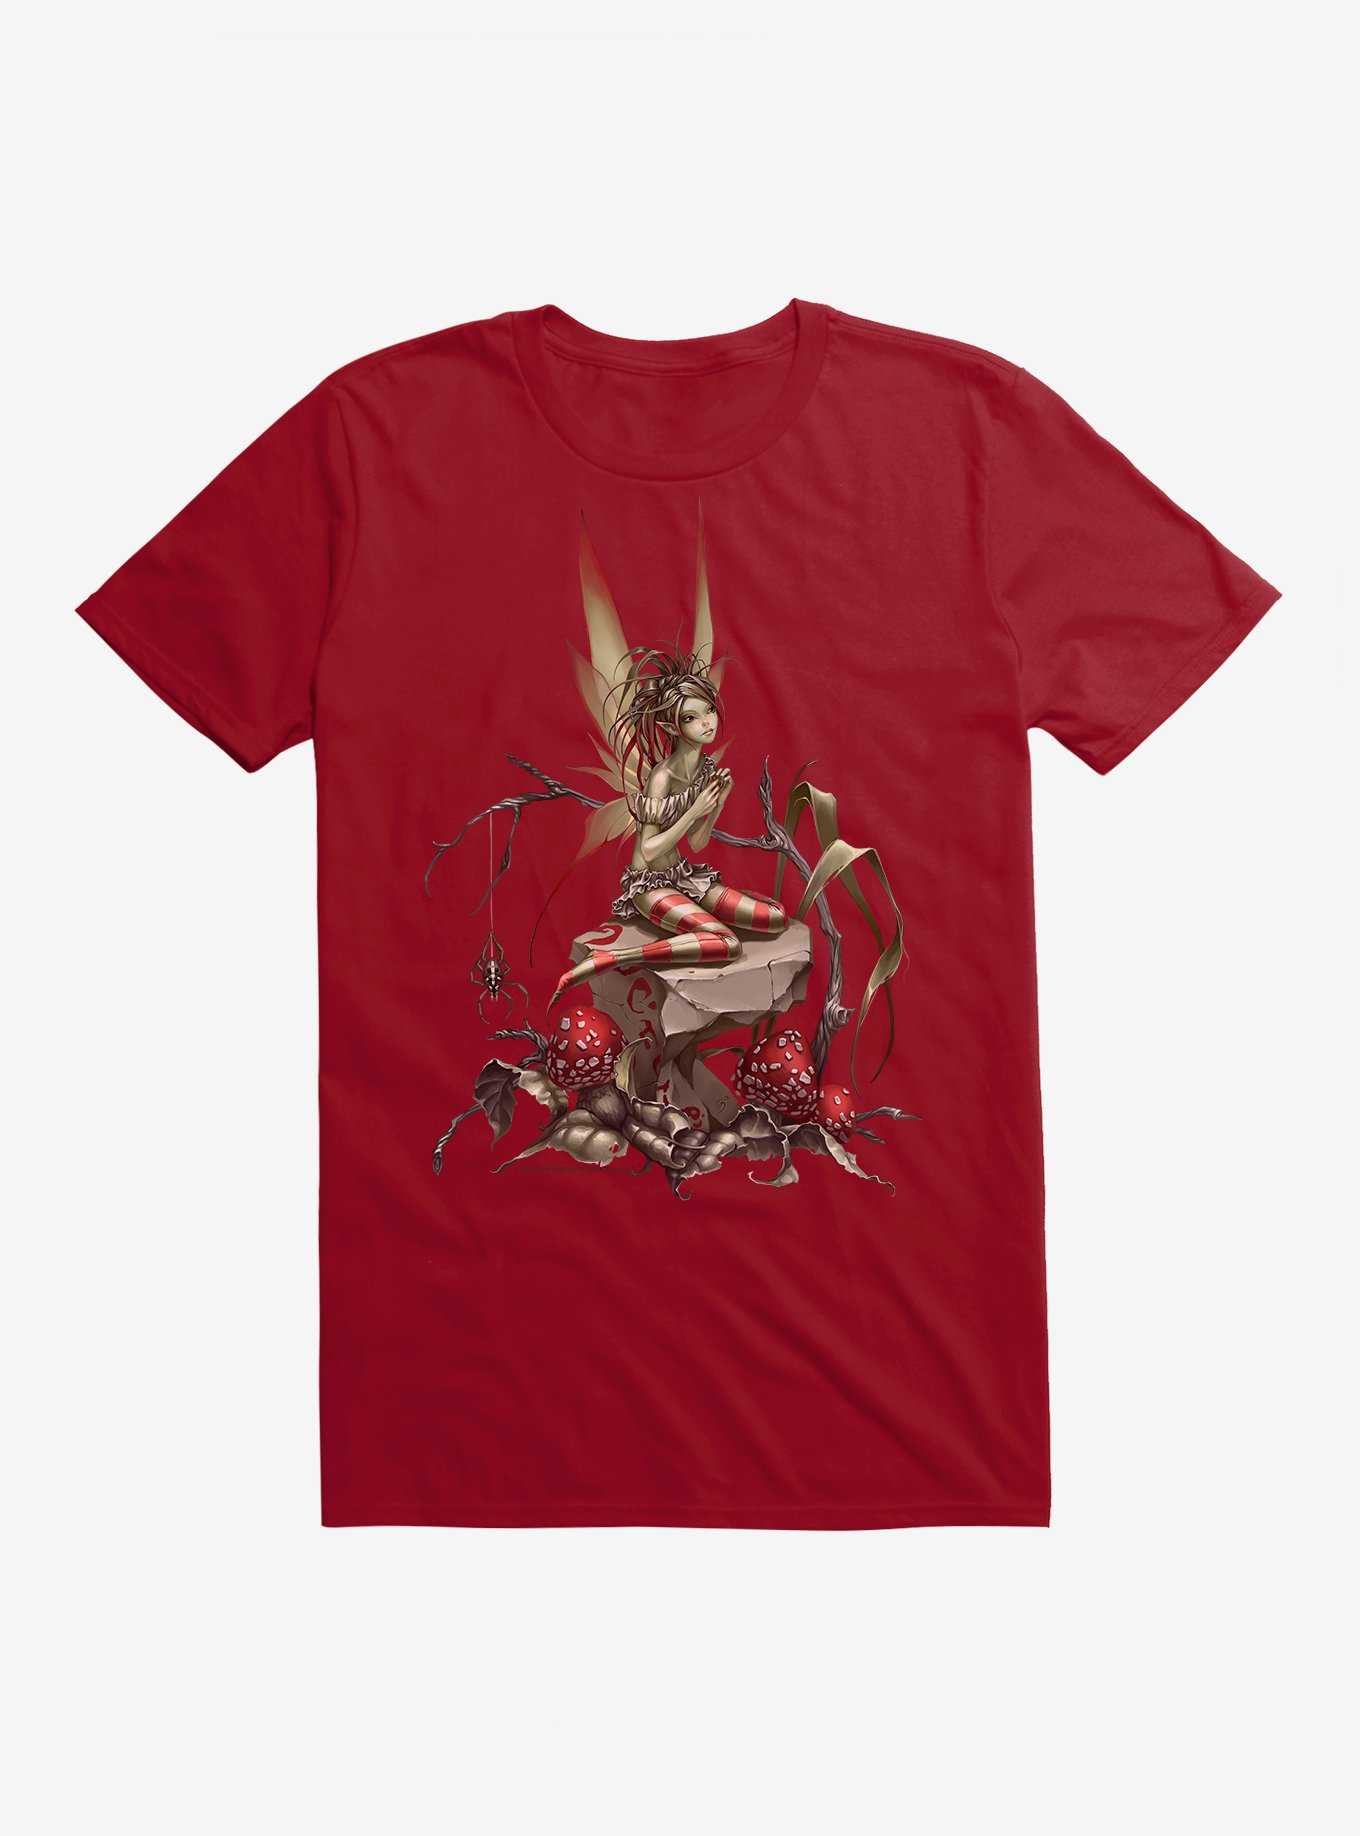 Fairies By Trick Mushroom Fairy T-Shirt, INDEPENDENCE RED, hi-res